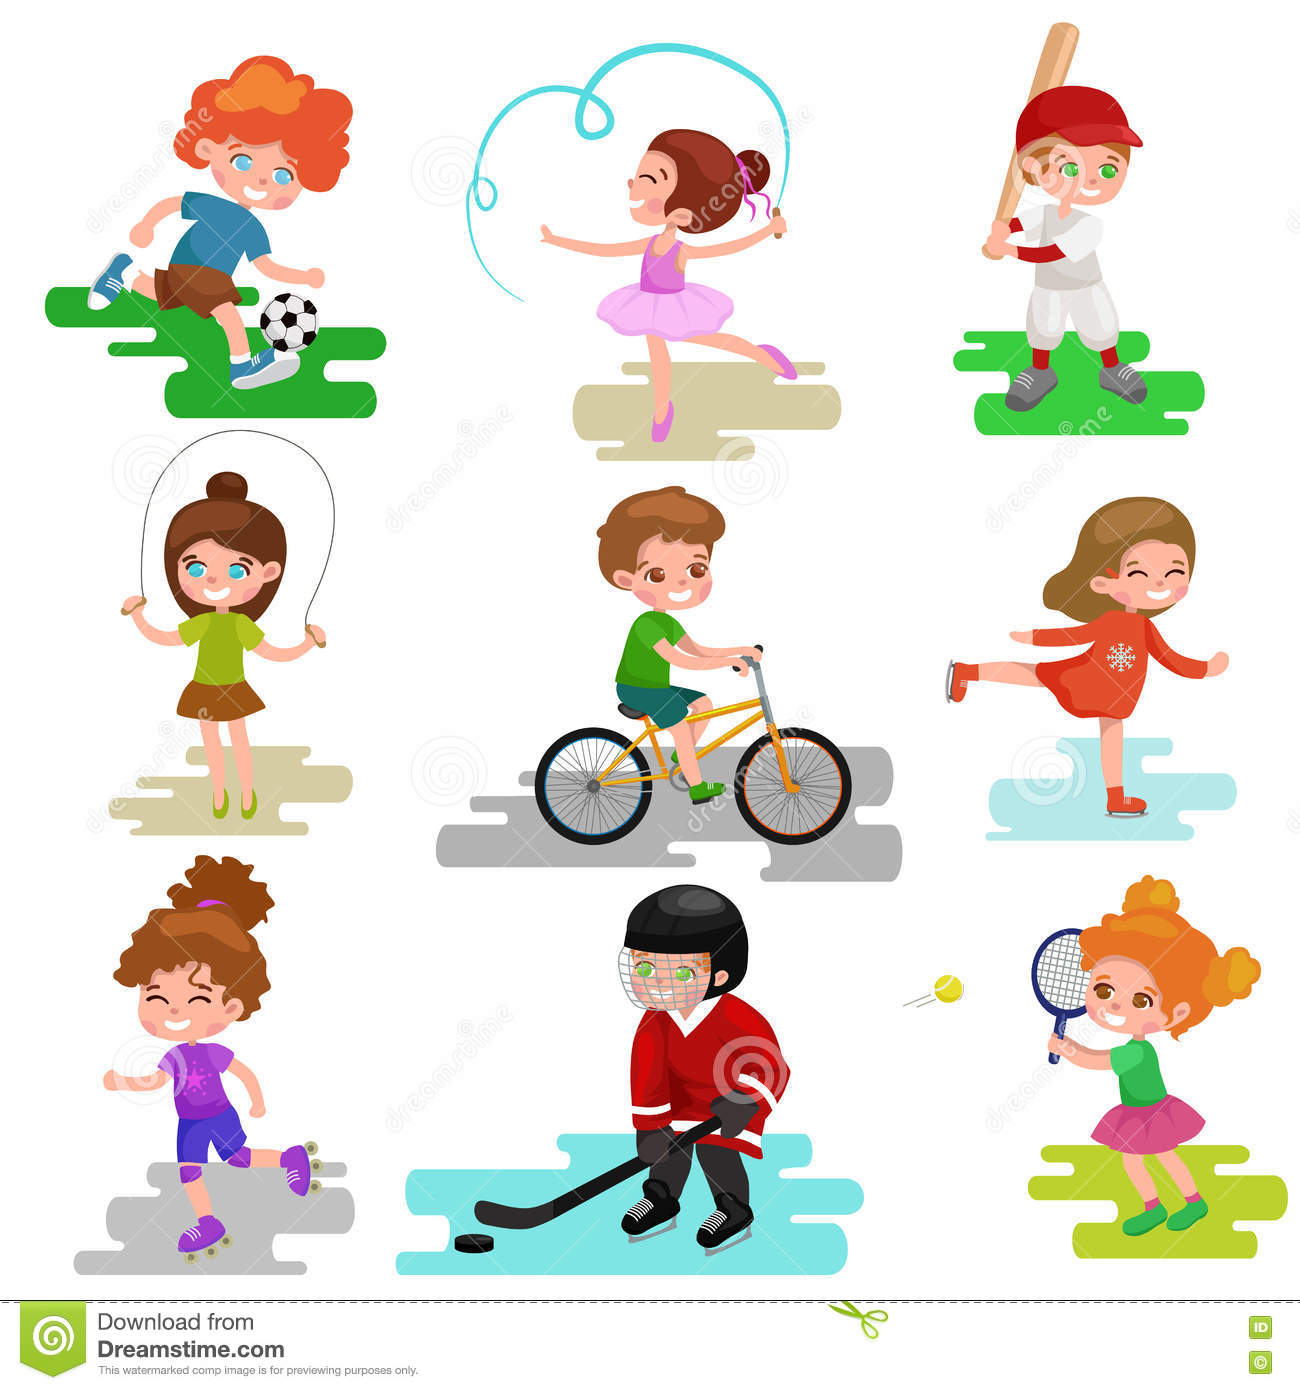 clipart play sports - photo #26